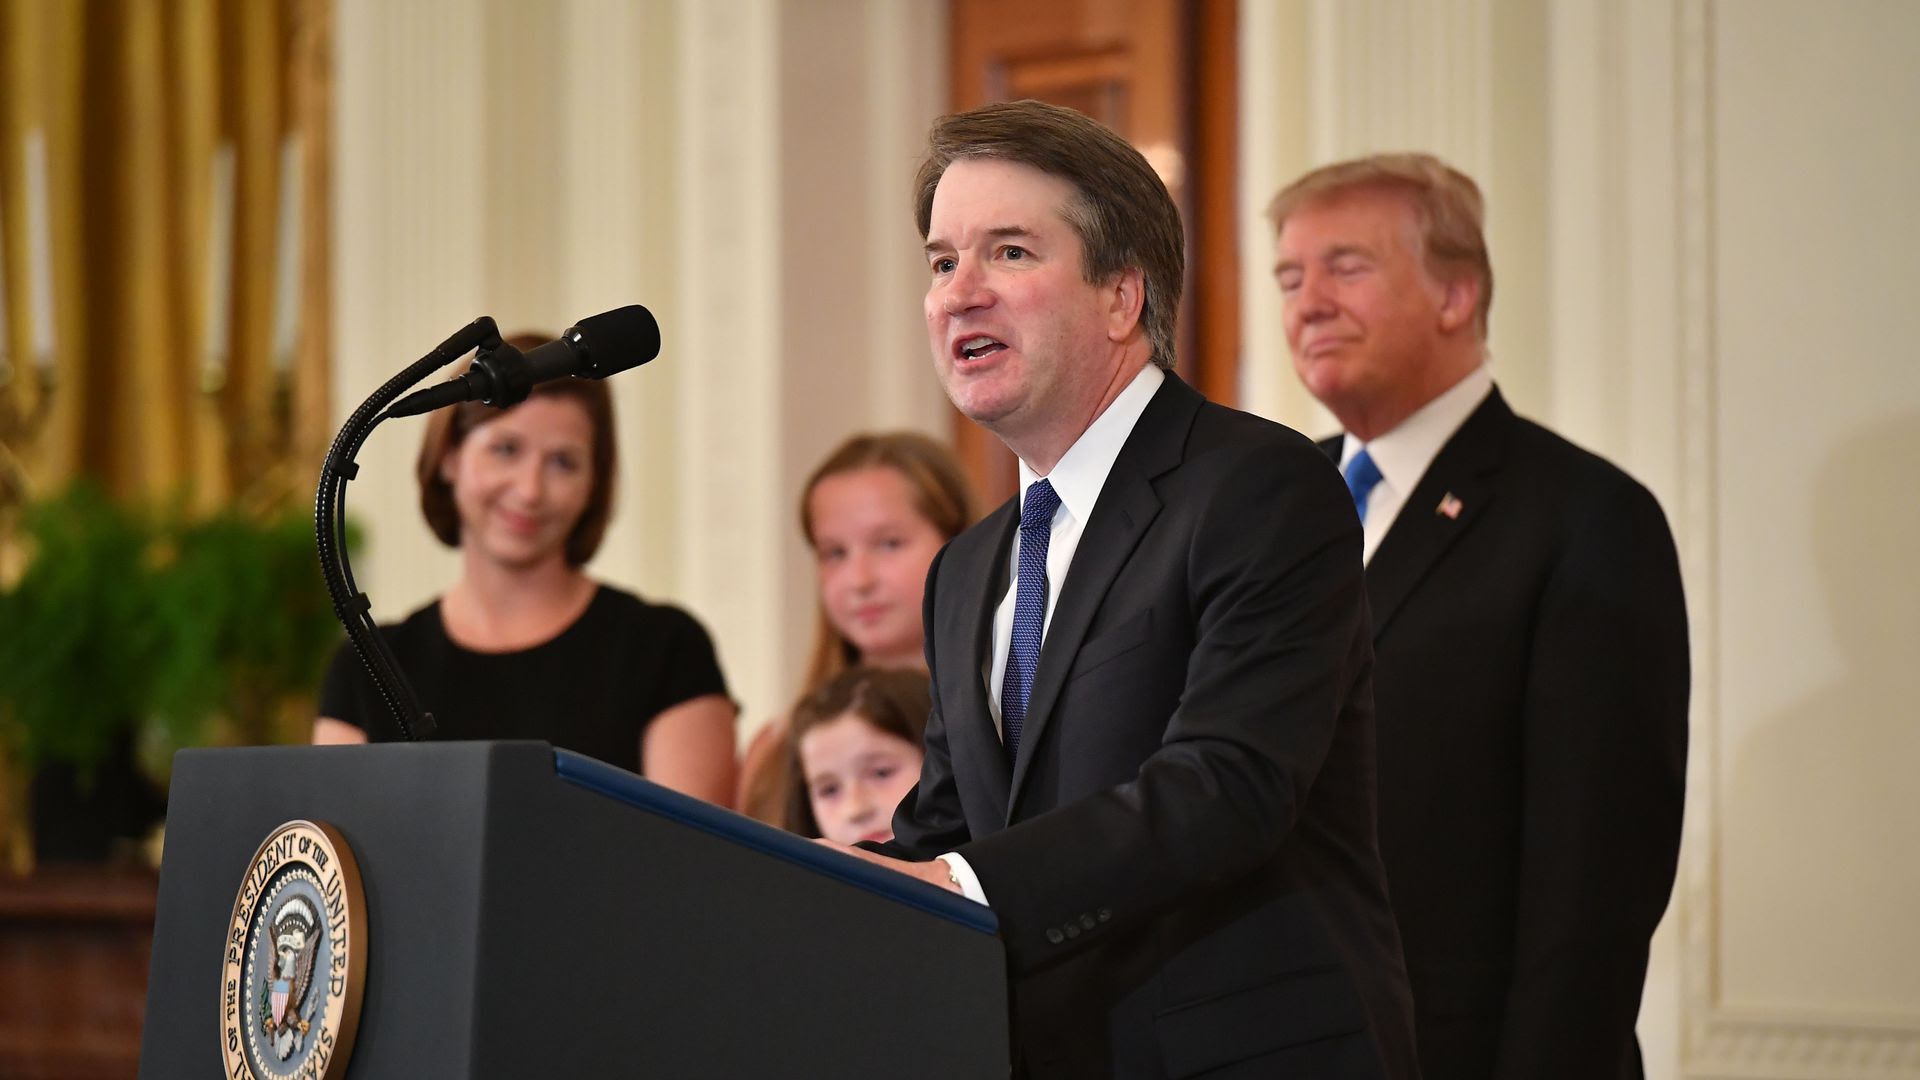 Inside the campaign to confirm Supreme Court nominee Brett Kavanaugh - Axios1920 x 1080